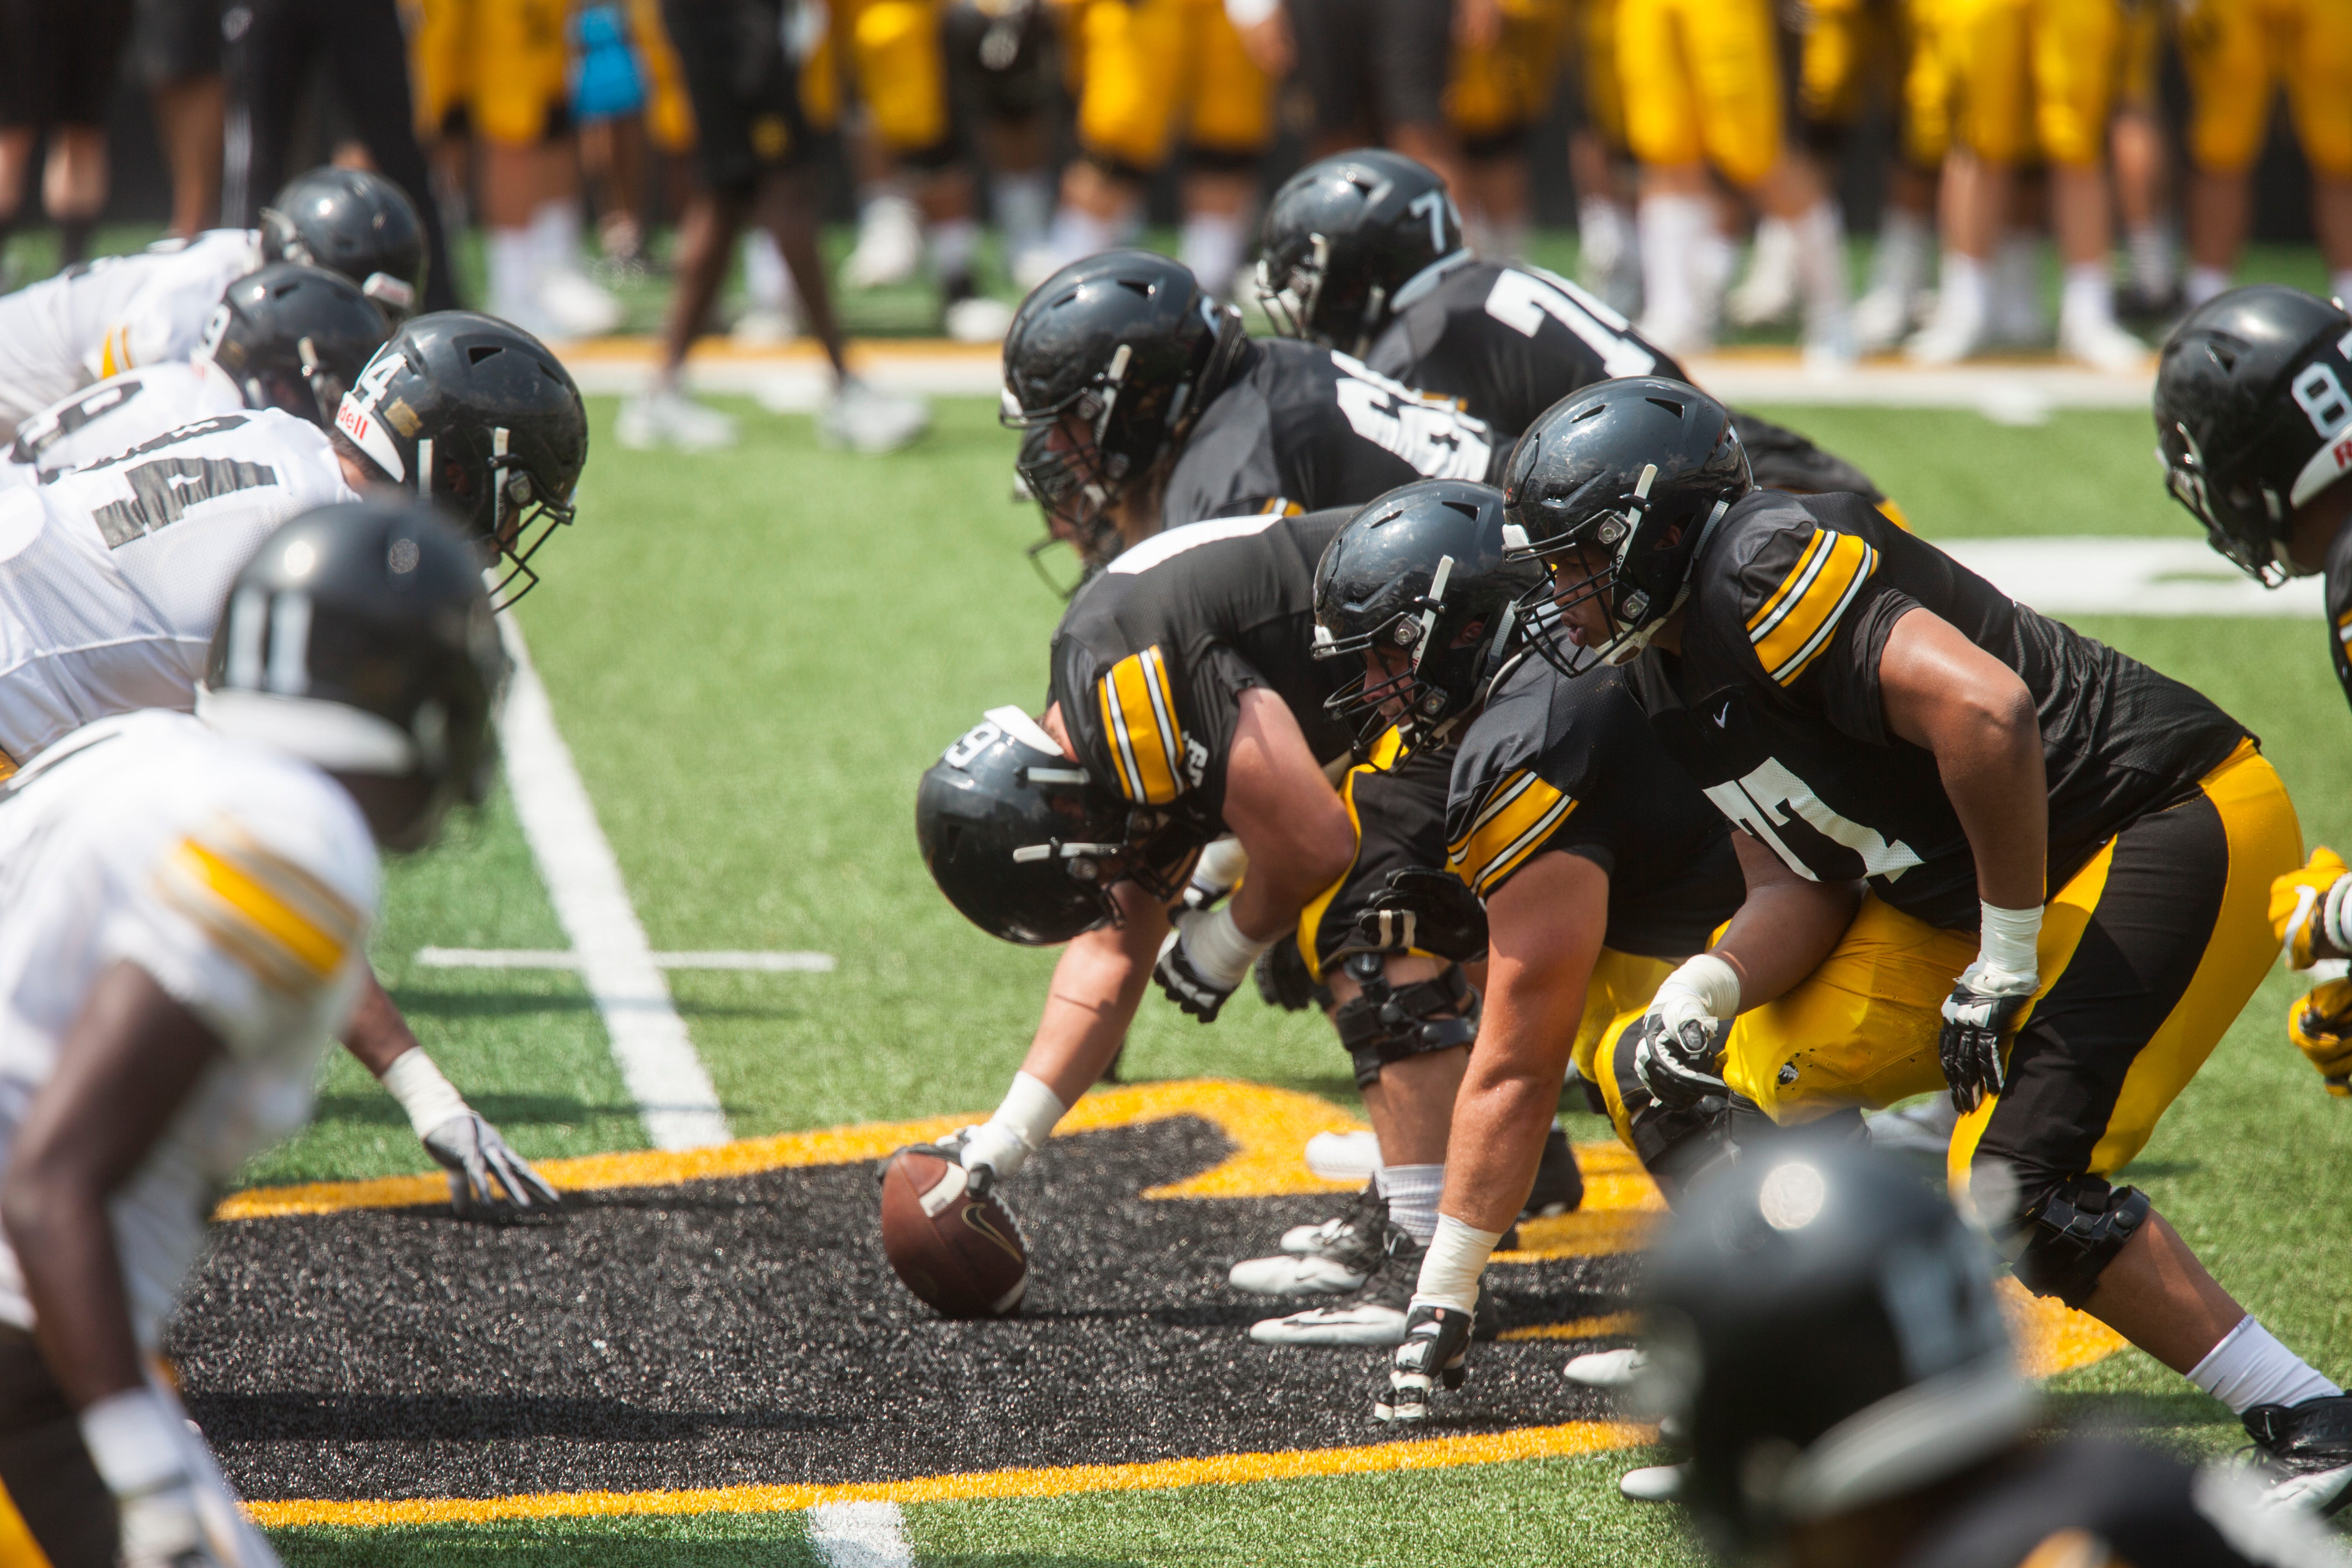 Iowa offensive lineman Alaric Jackson (77) lines up during a Kids Day practice on Saturday, Aug. 11, 2018, at Kinnick Stadium in Iowa City.